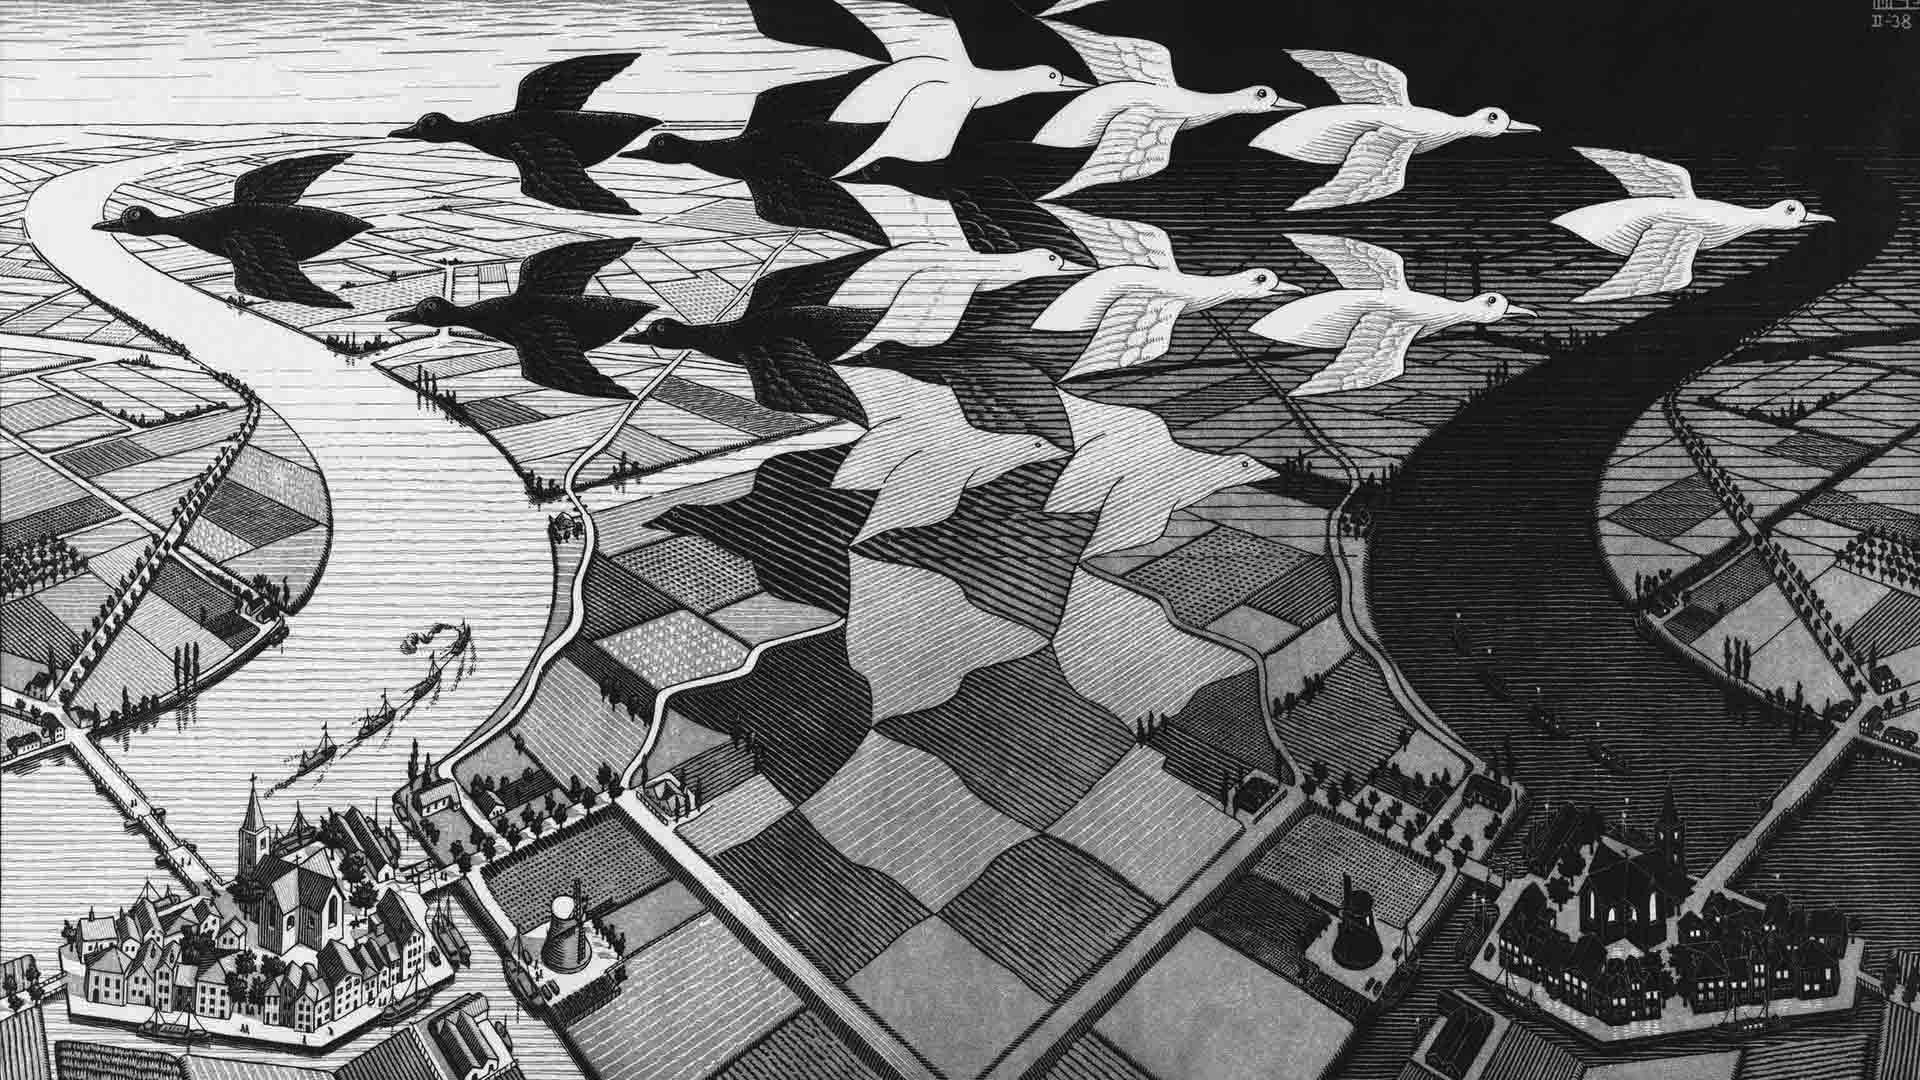 Day and Night, woodblock detail, by M.C. Escher